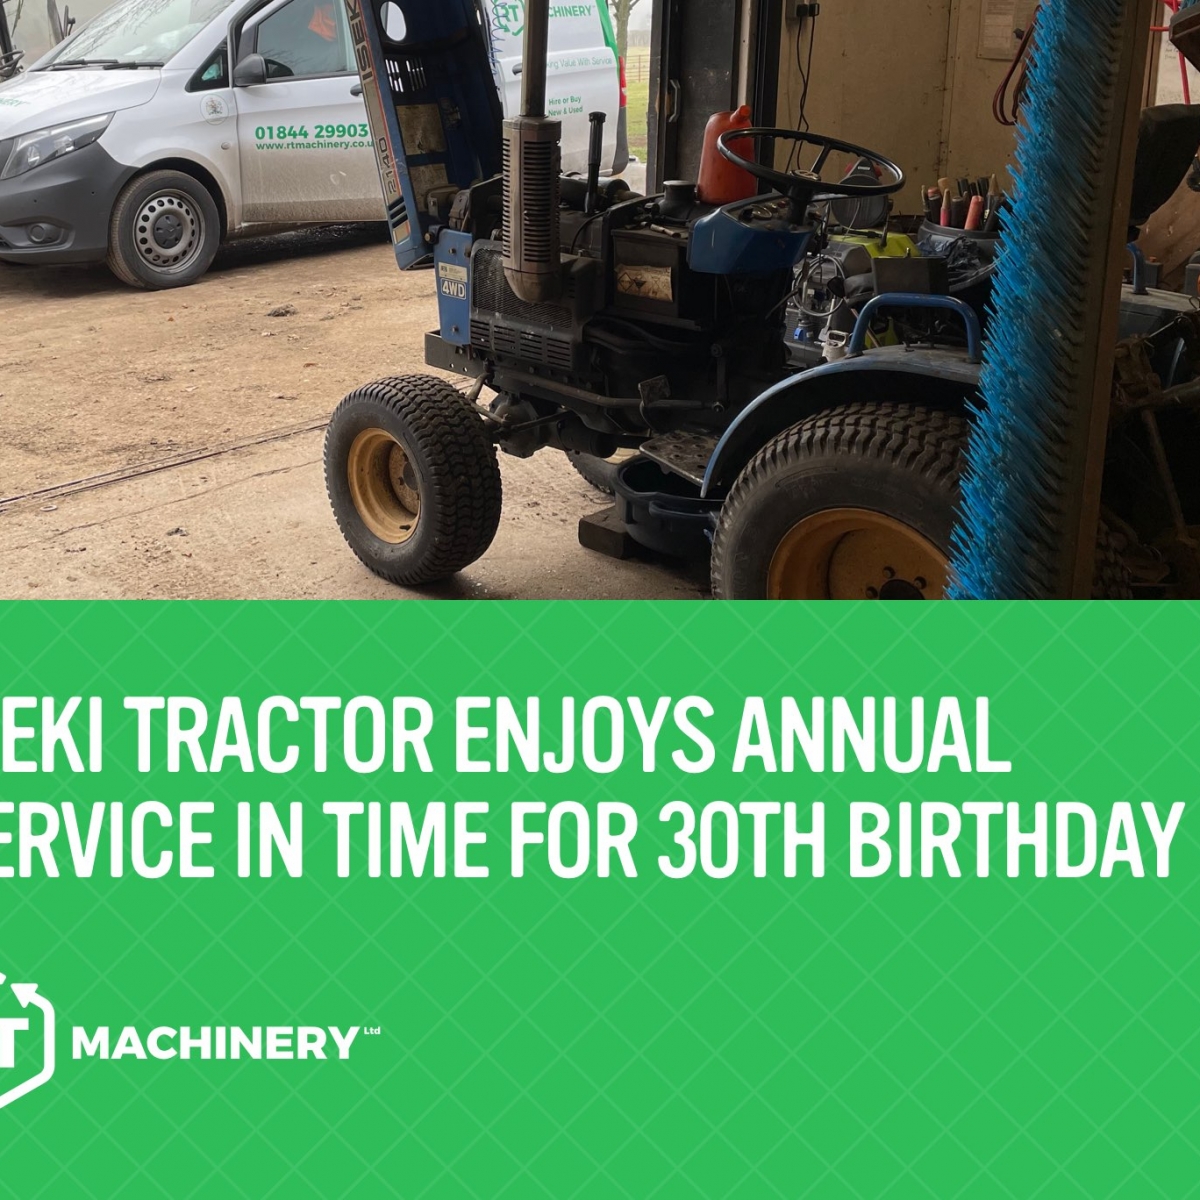 Iseki Tractor Enjoys Annual Service in Time For 30th Birthday